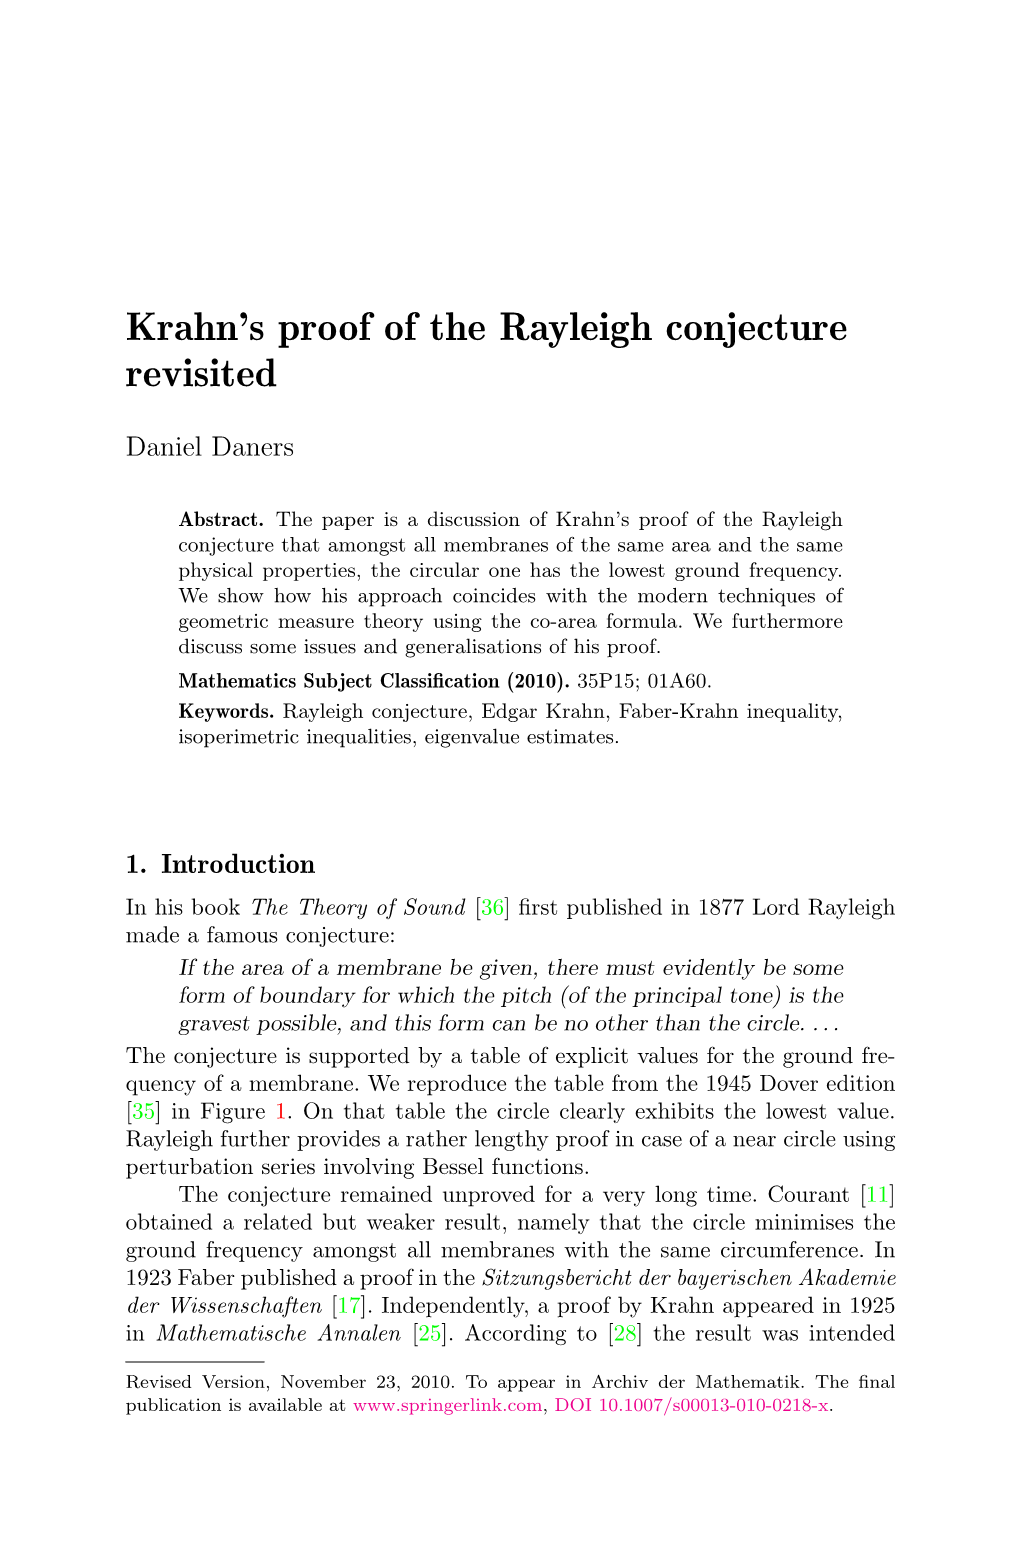 Krahn's Proof of the Rayleigh Conjecture Revisited